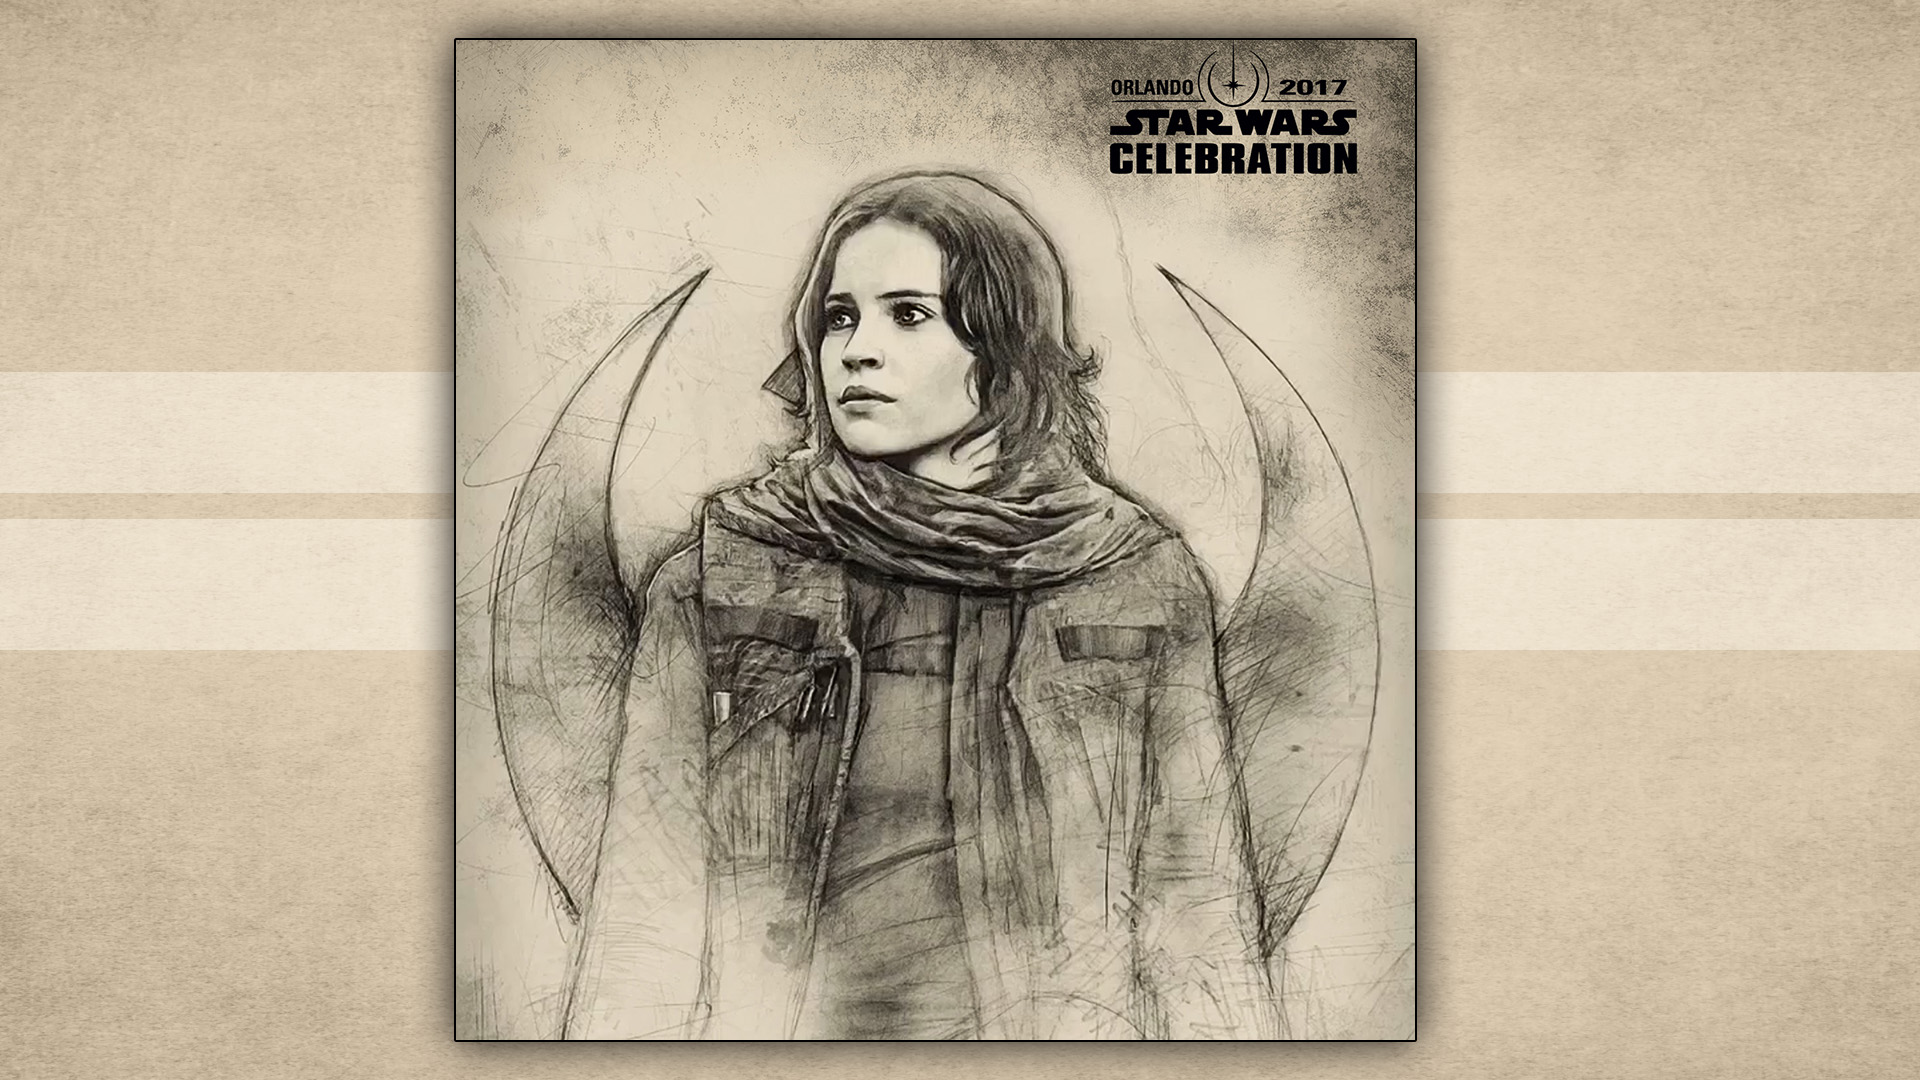 Jyn Erso: Sunday Adult Badge by Paul Shipper (edited by Michael White)